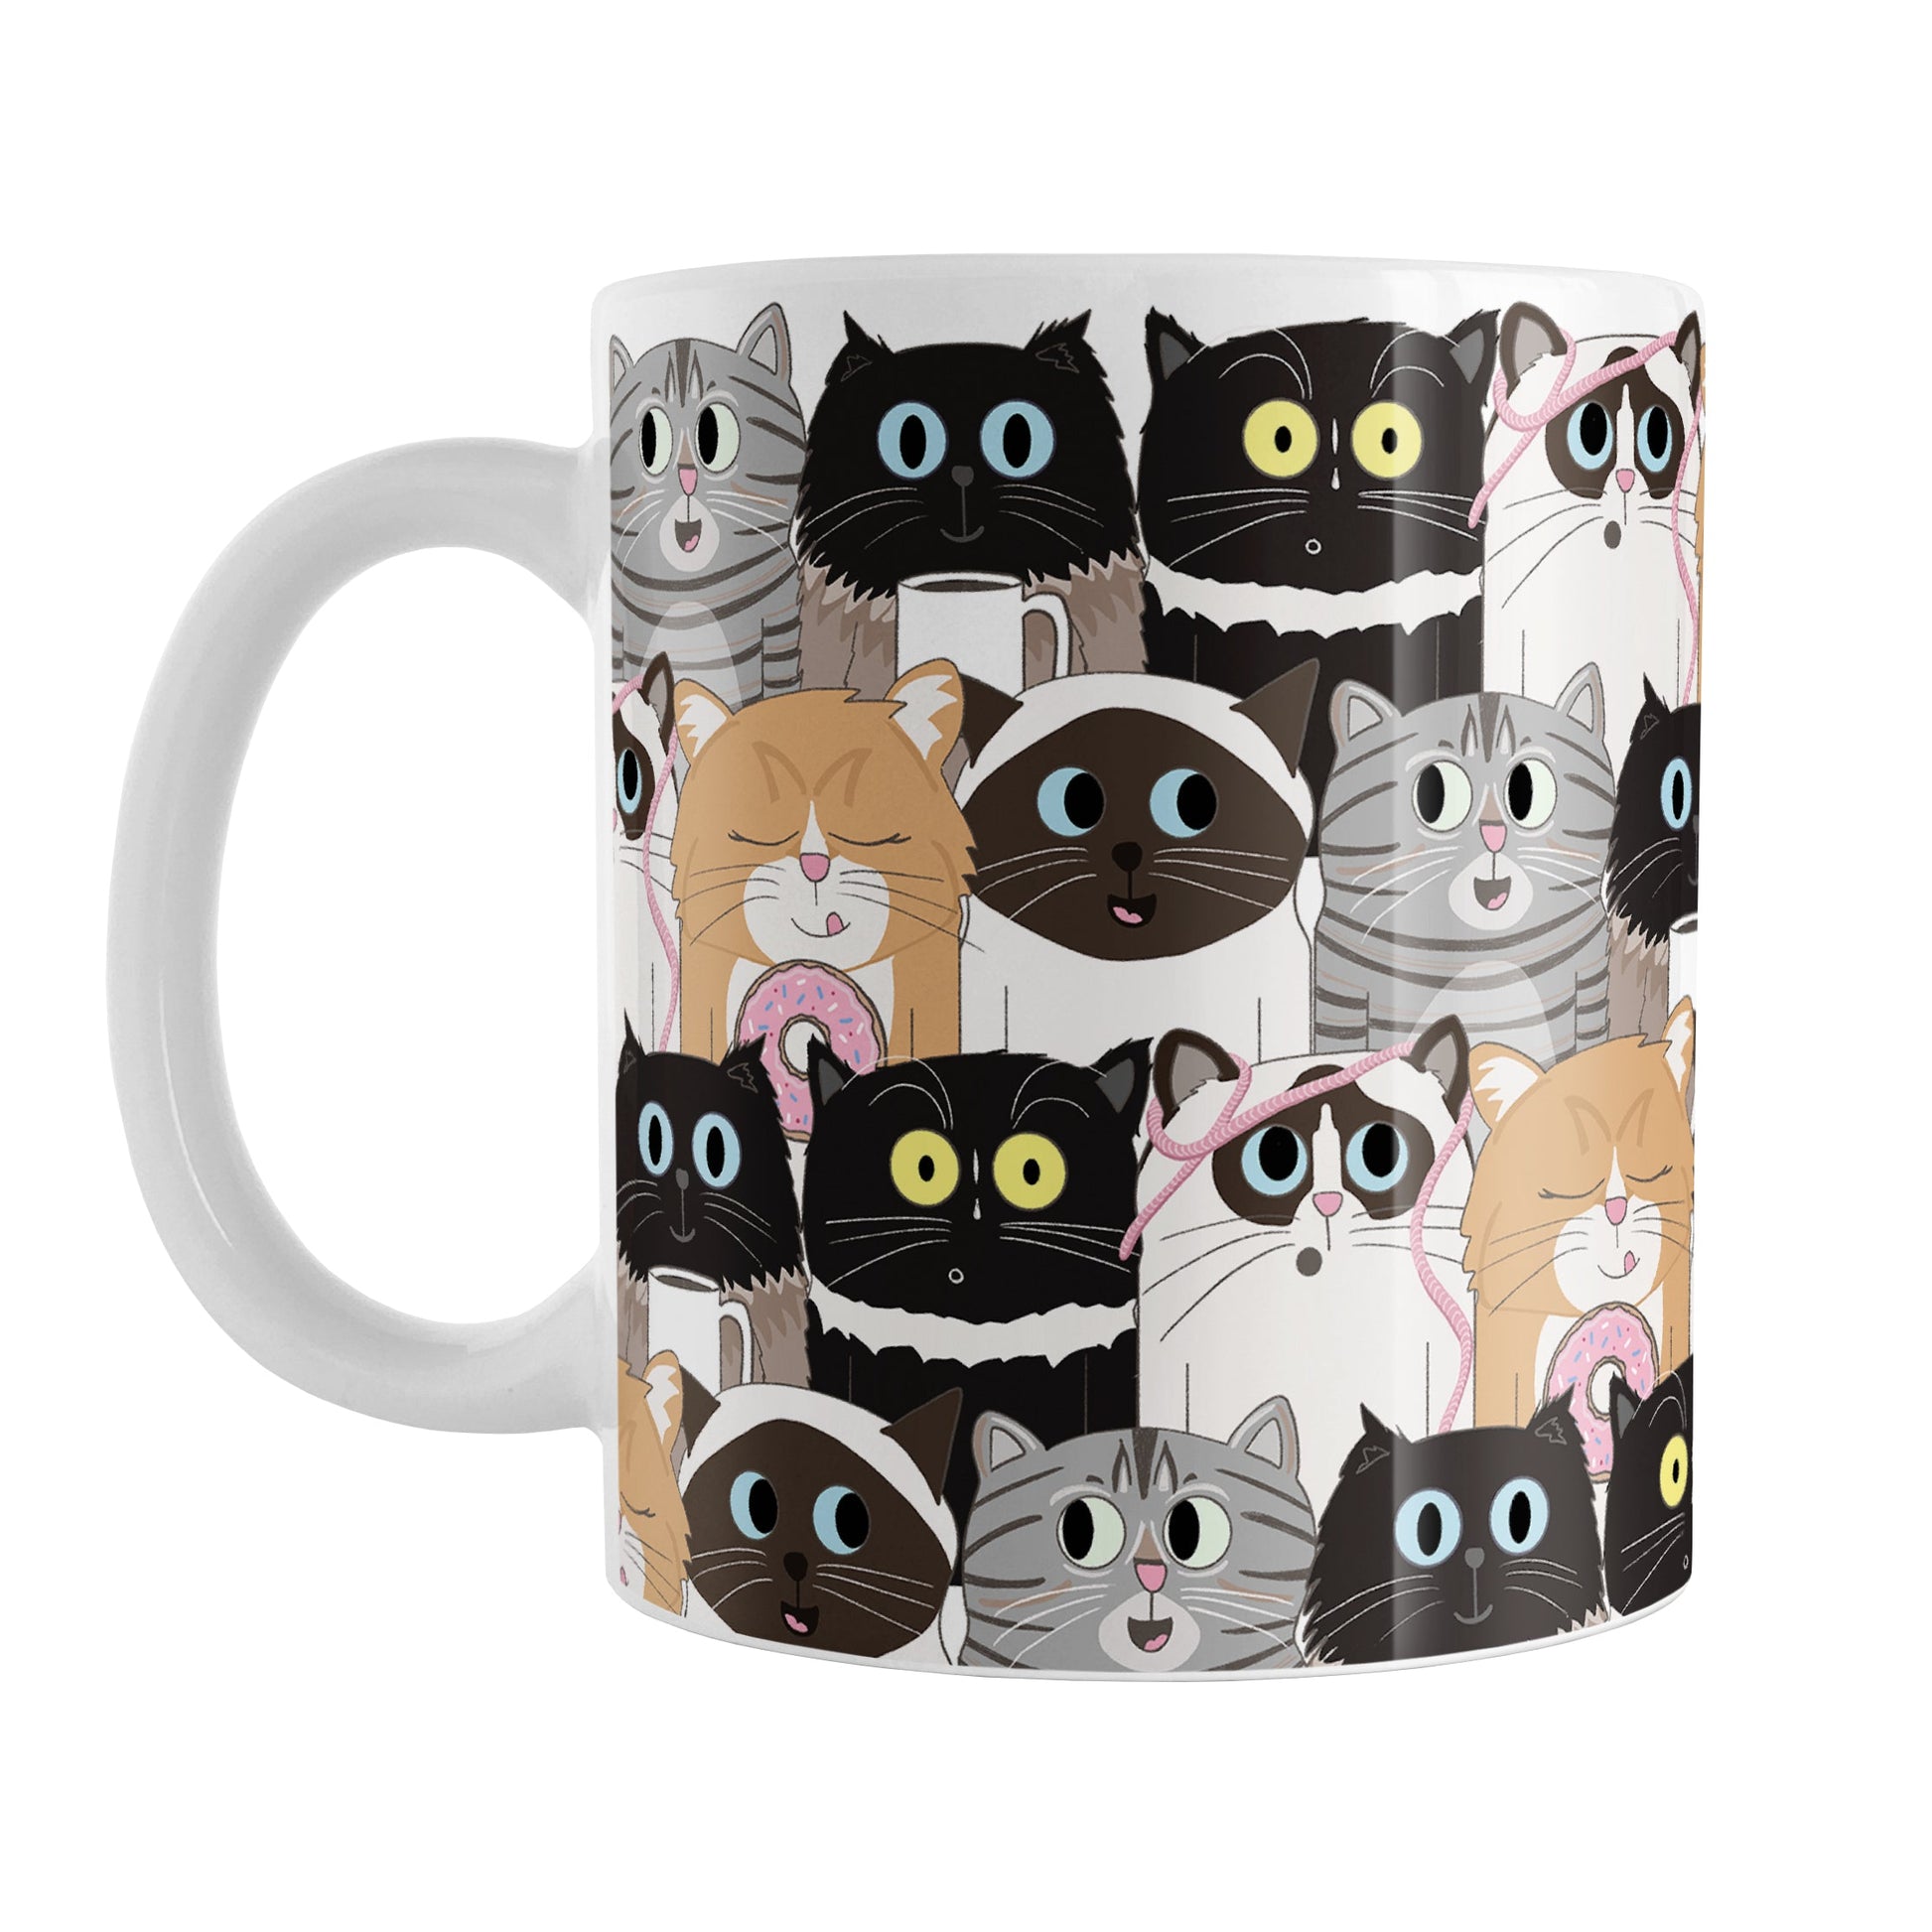 Cute Cat Stack Pattern Mug (11oz) at Amy's Coffee Mugs. Cute cats mug with an illustrated pattern of different breeds of cats with different fun expressions, with yarn, coffee, and donuts. This stacked pattern of cats wraps around the ceramic mug to the handle.